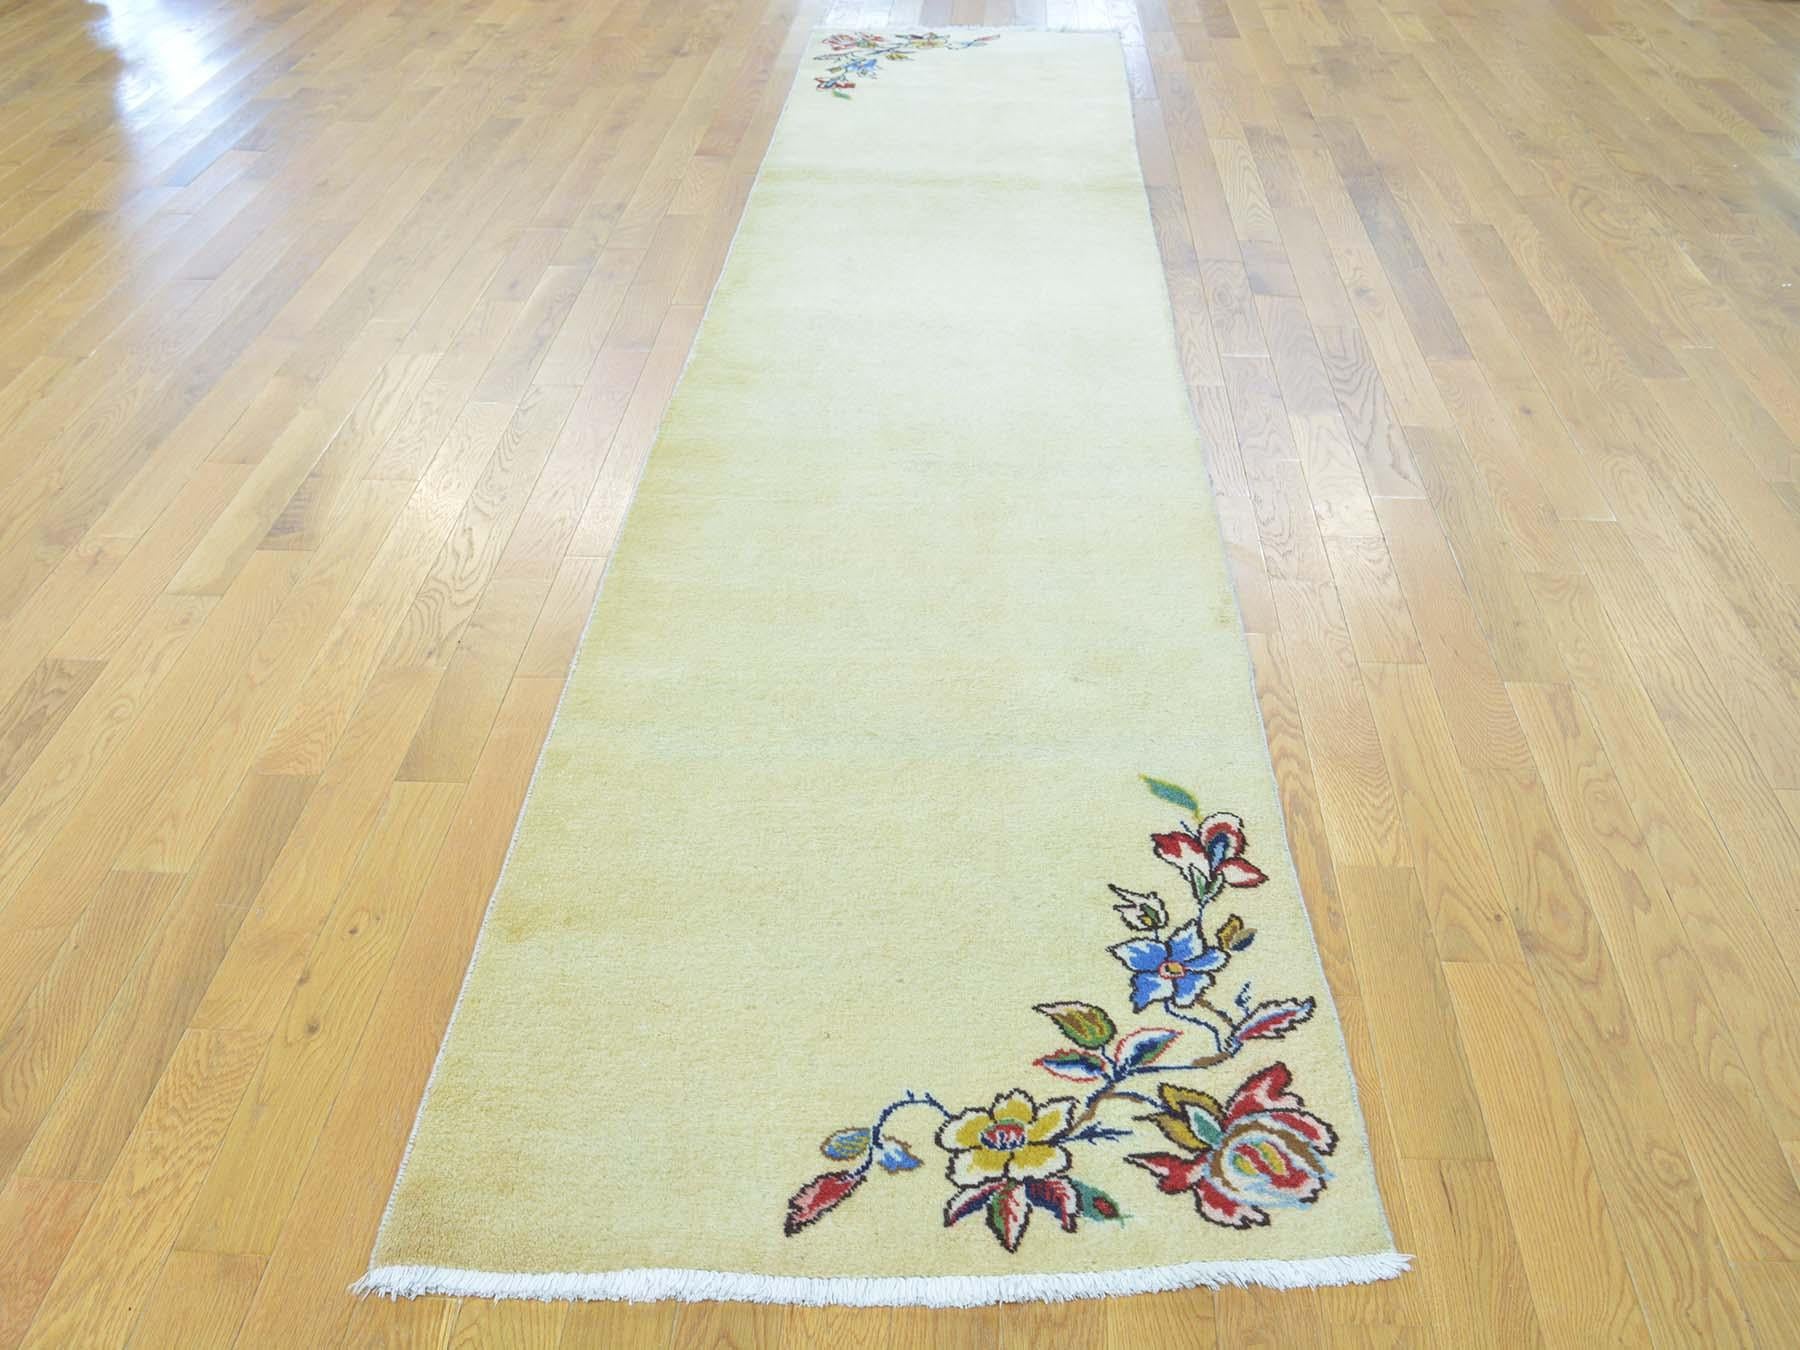 This fabulous hand knotted carpet has been created and designed for extra strength and durability. This rug has been handcrafted for weeks in the traditional method that is used to make rugs. This is truly a one of a kind piece. 

Exact rug size